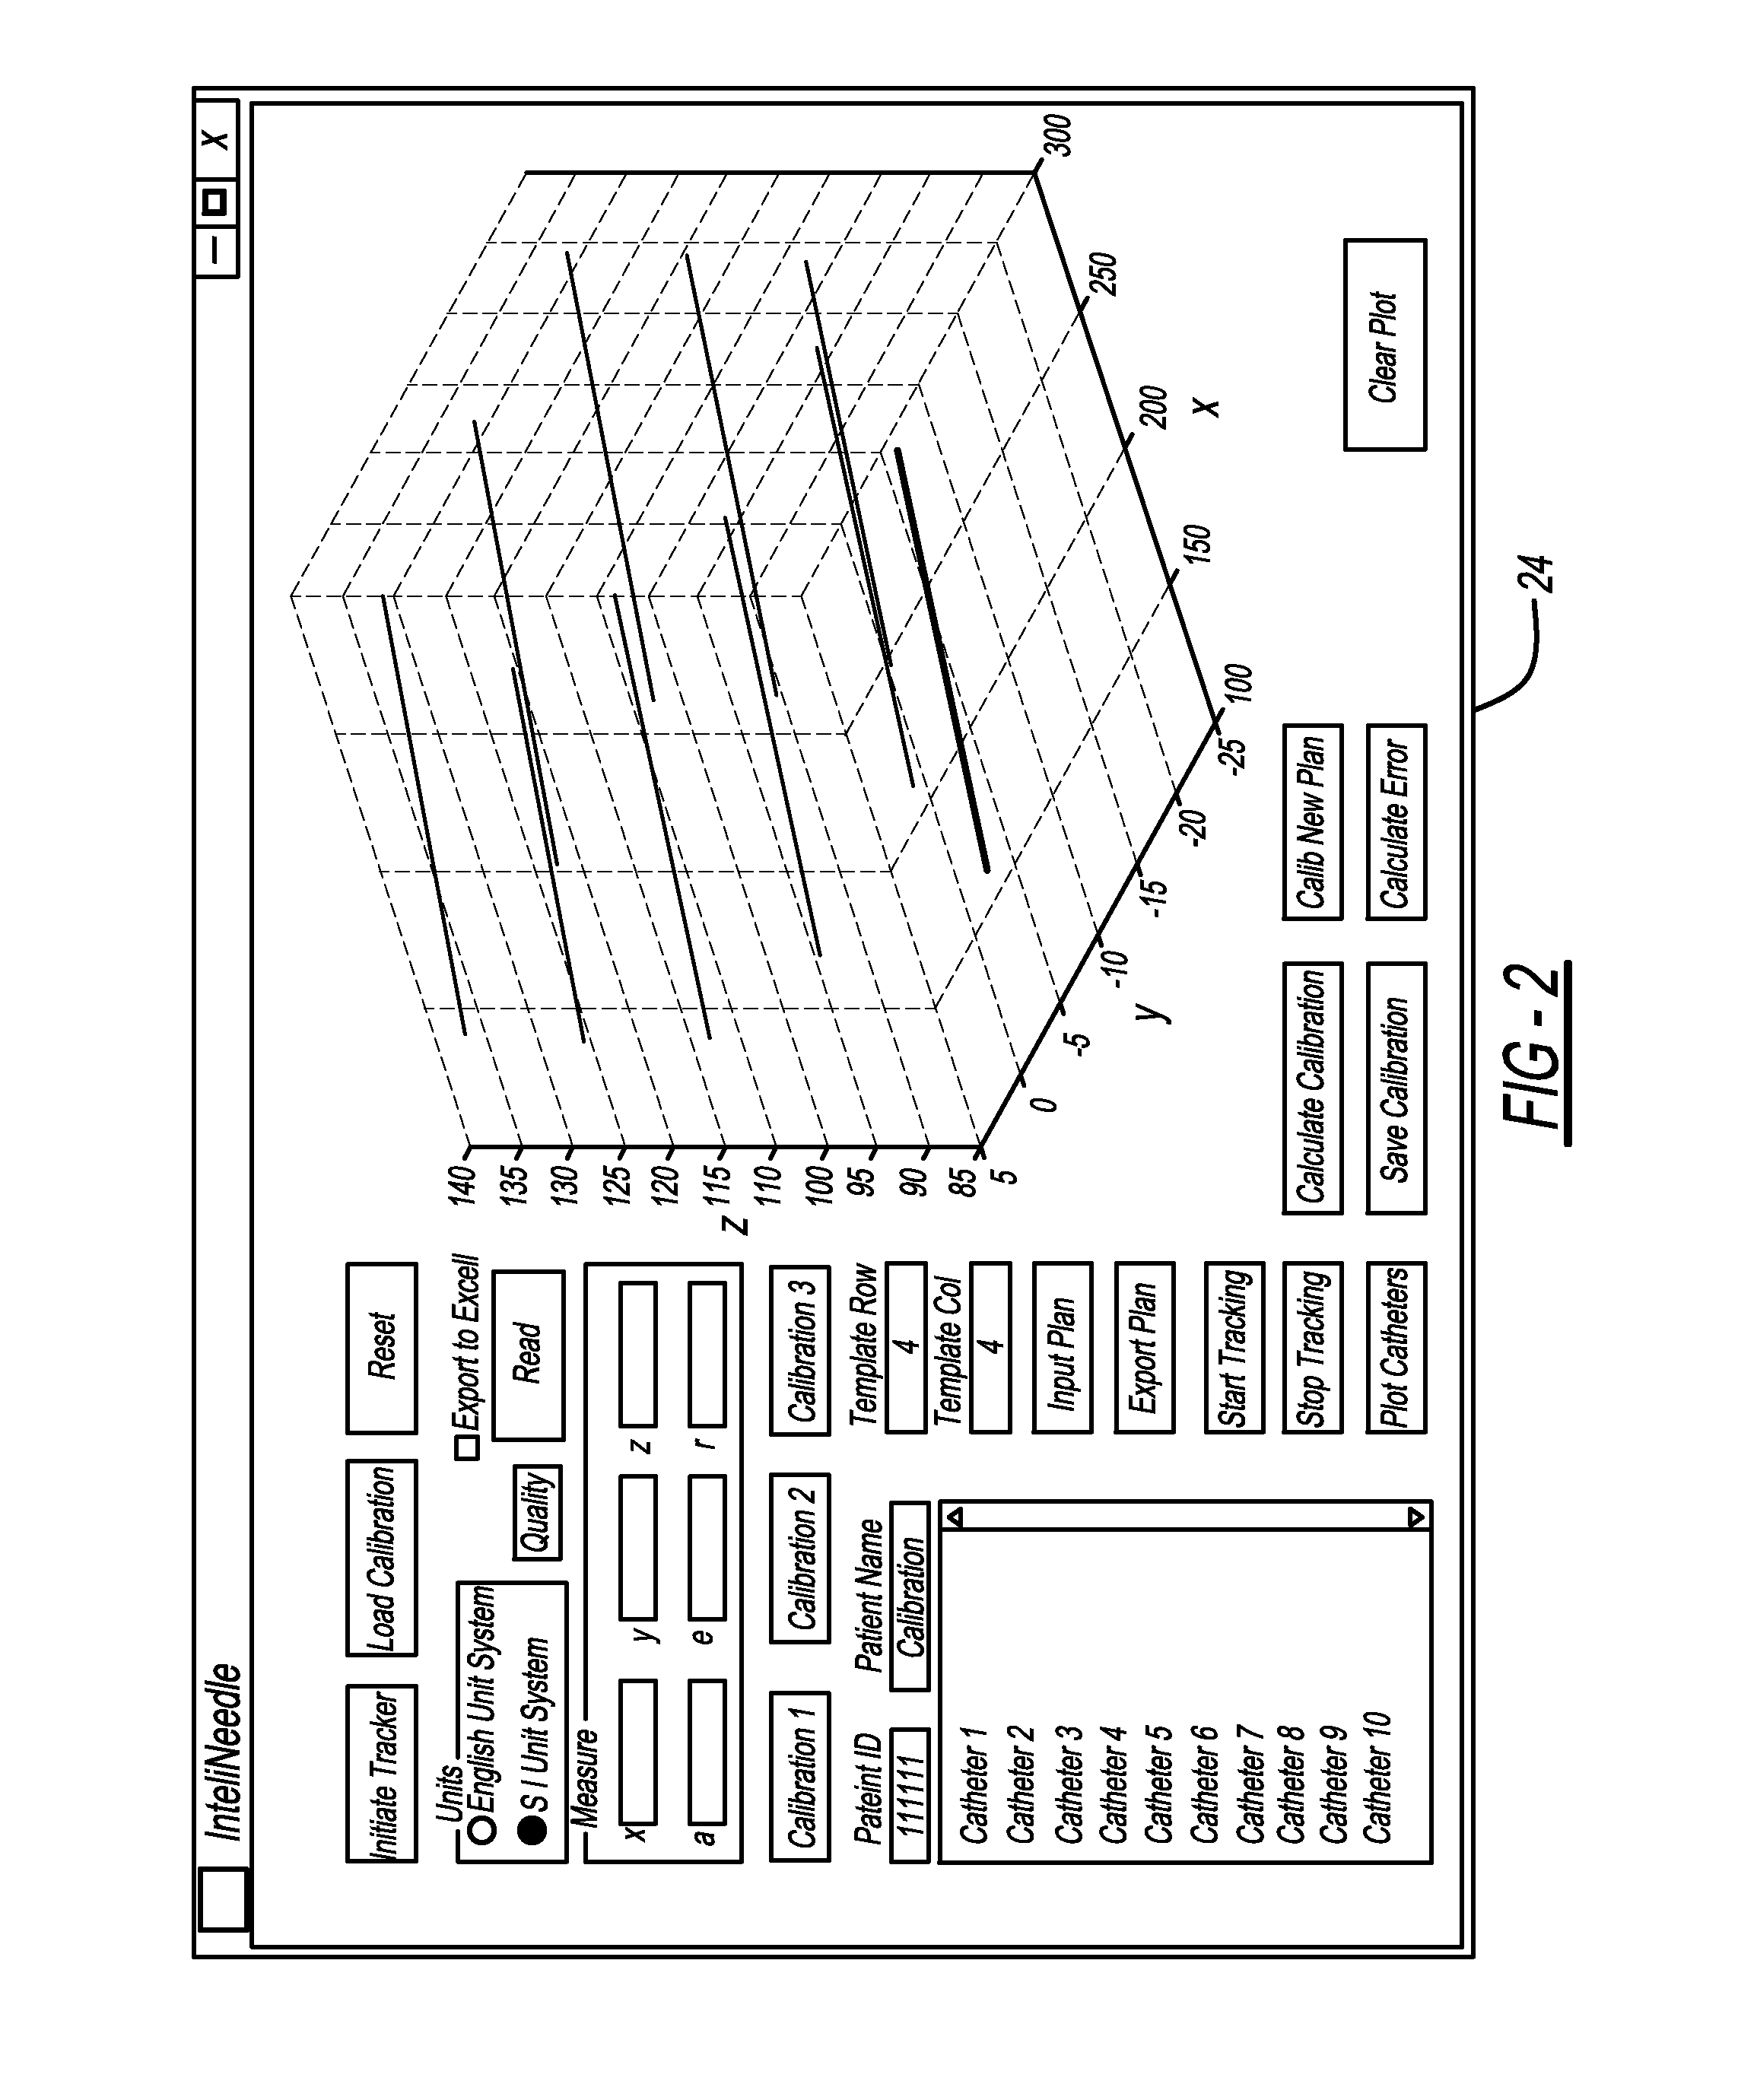 Catheter Placement Detection System and Method for Surgical Procedures